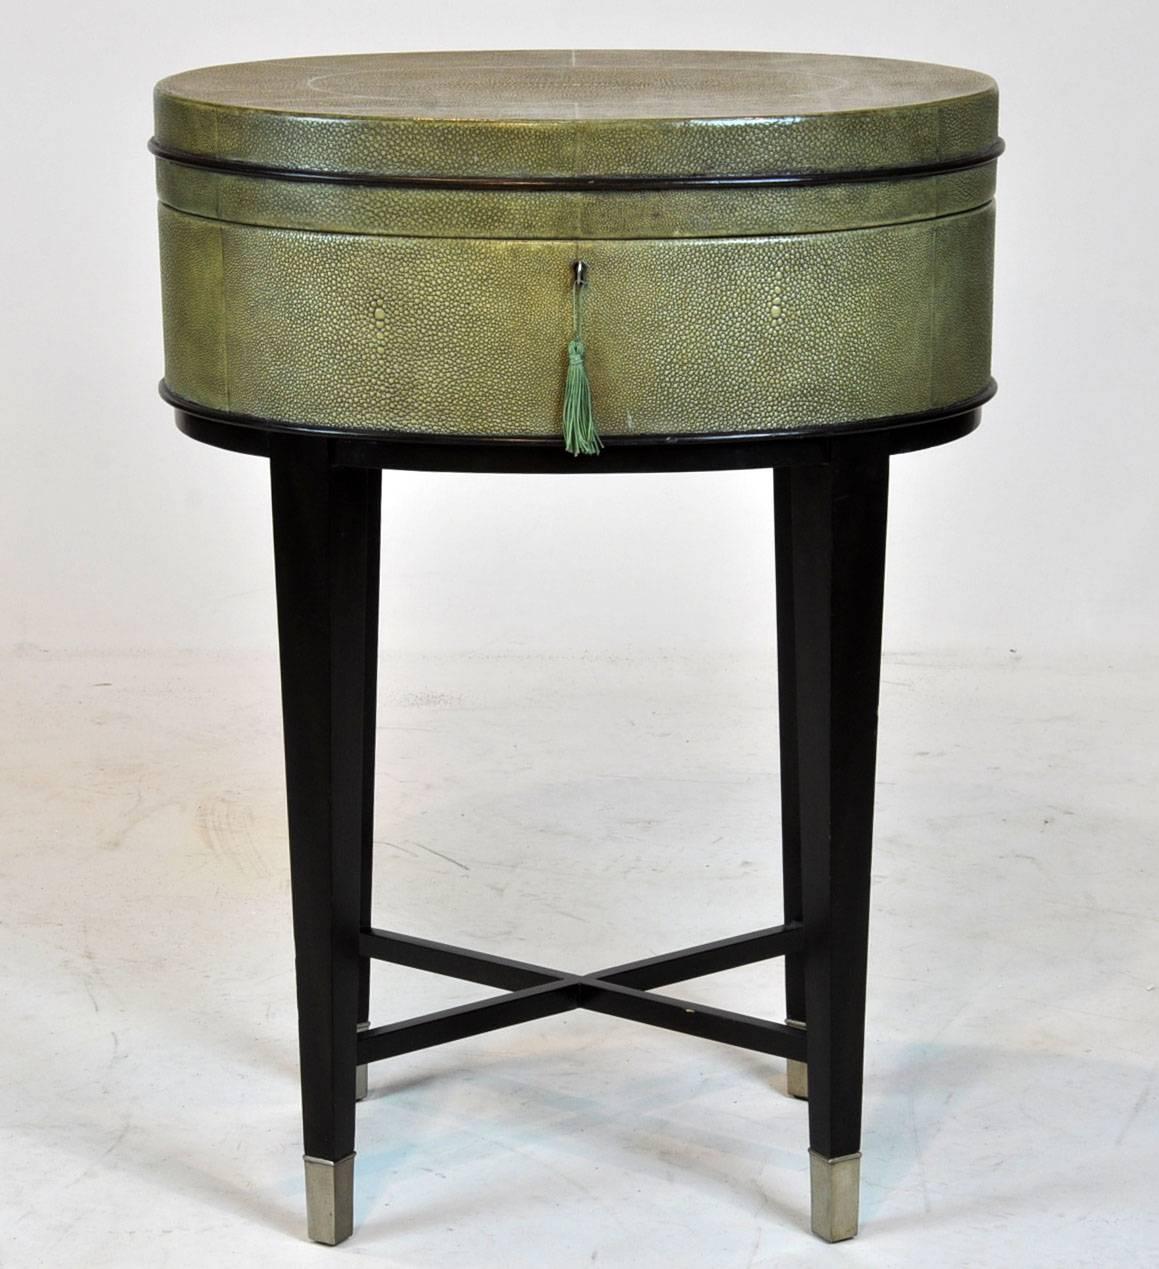 Fabulous pair of Shagreen side tables with lift lid top. Ebonized legs with silver colored casters on bottom. Great condition.